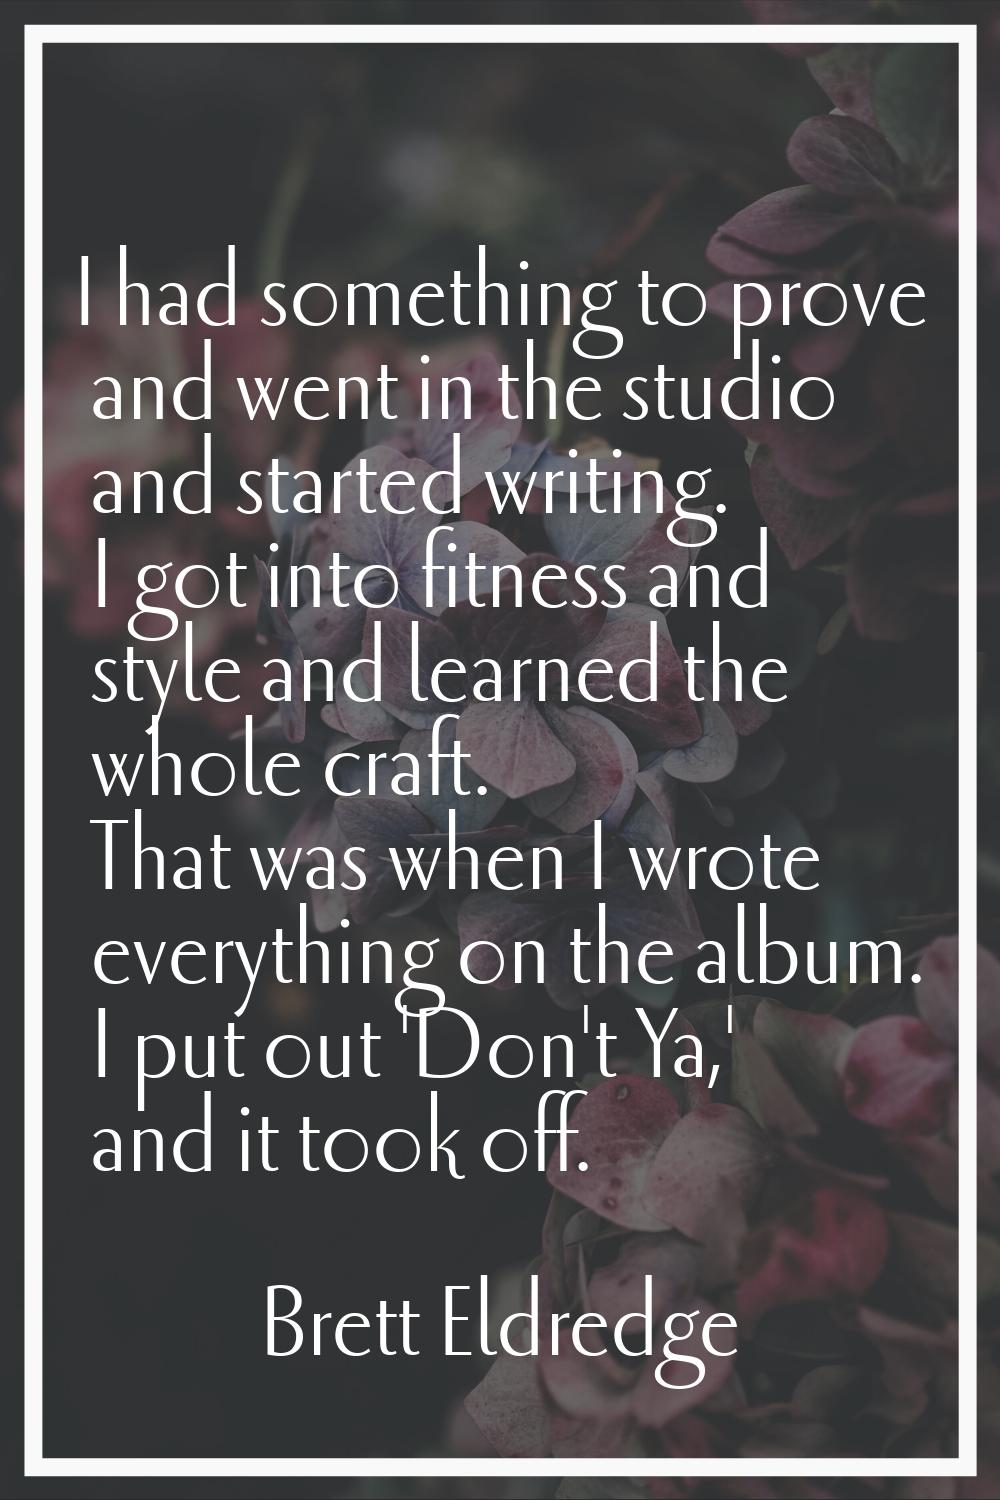 I had something to prove and went in the studio and started writing. I got into fitness and style a